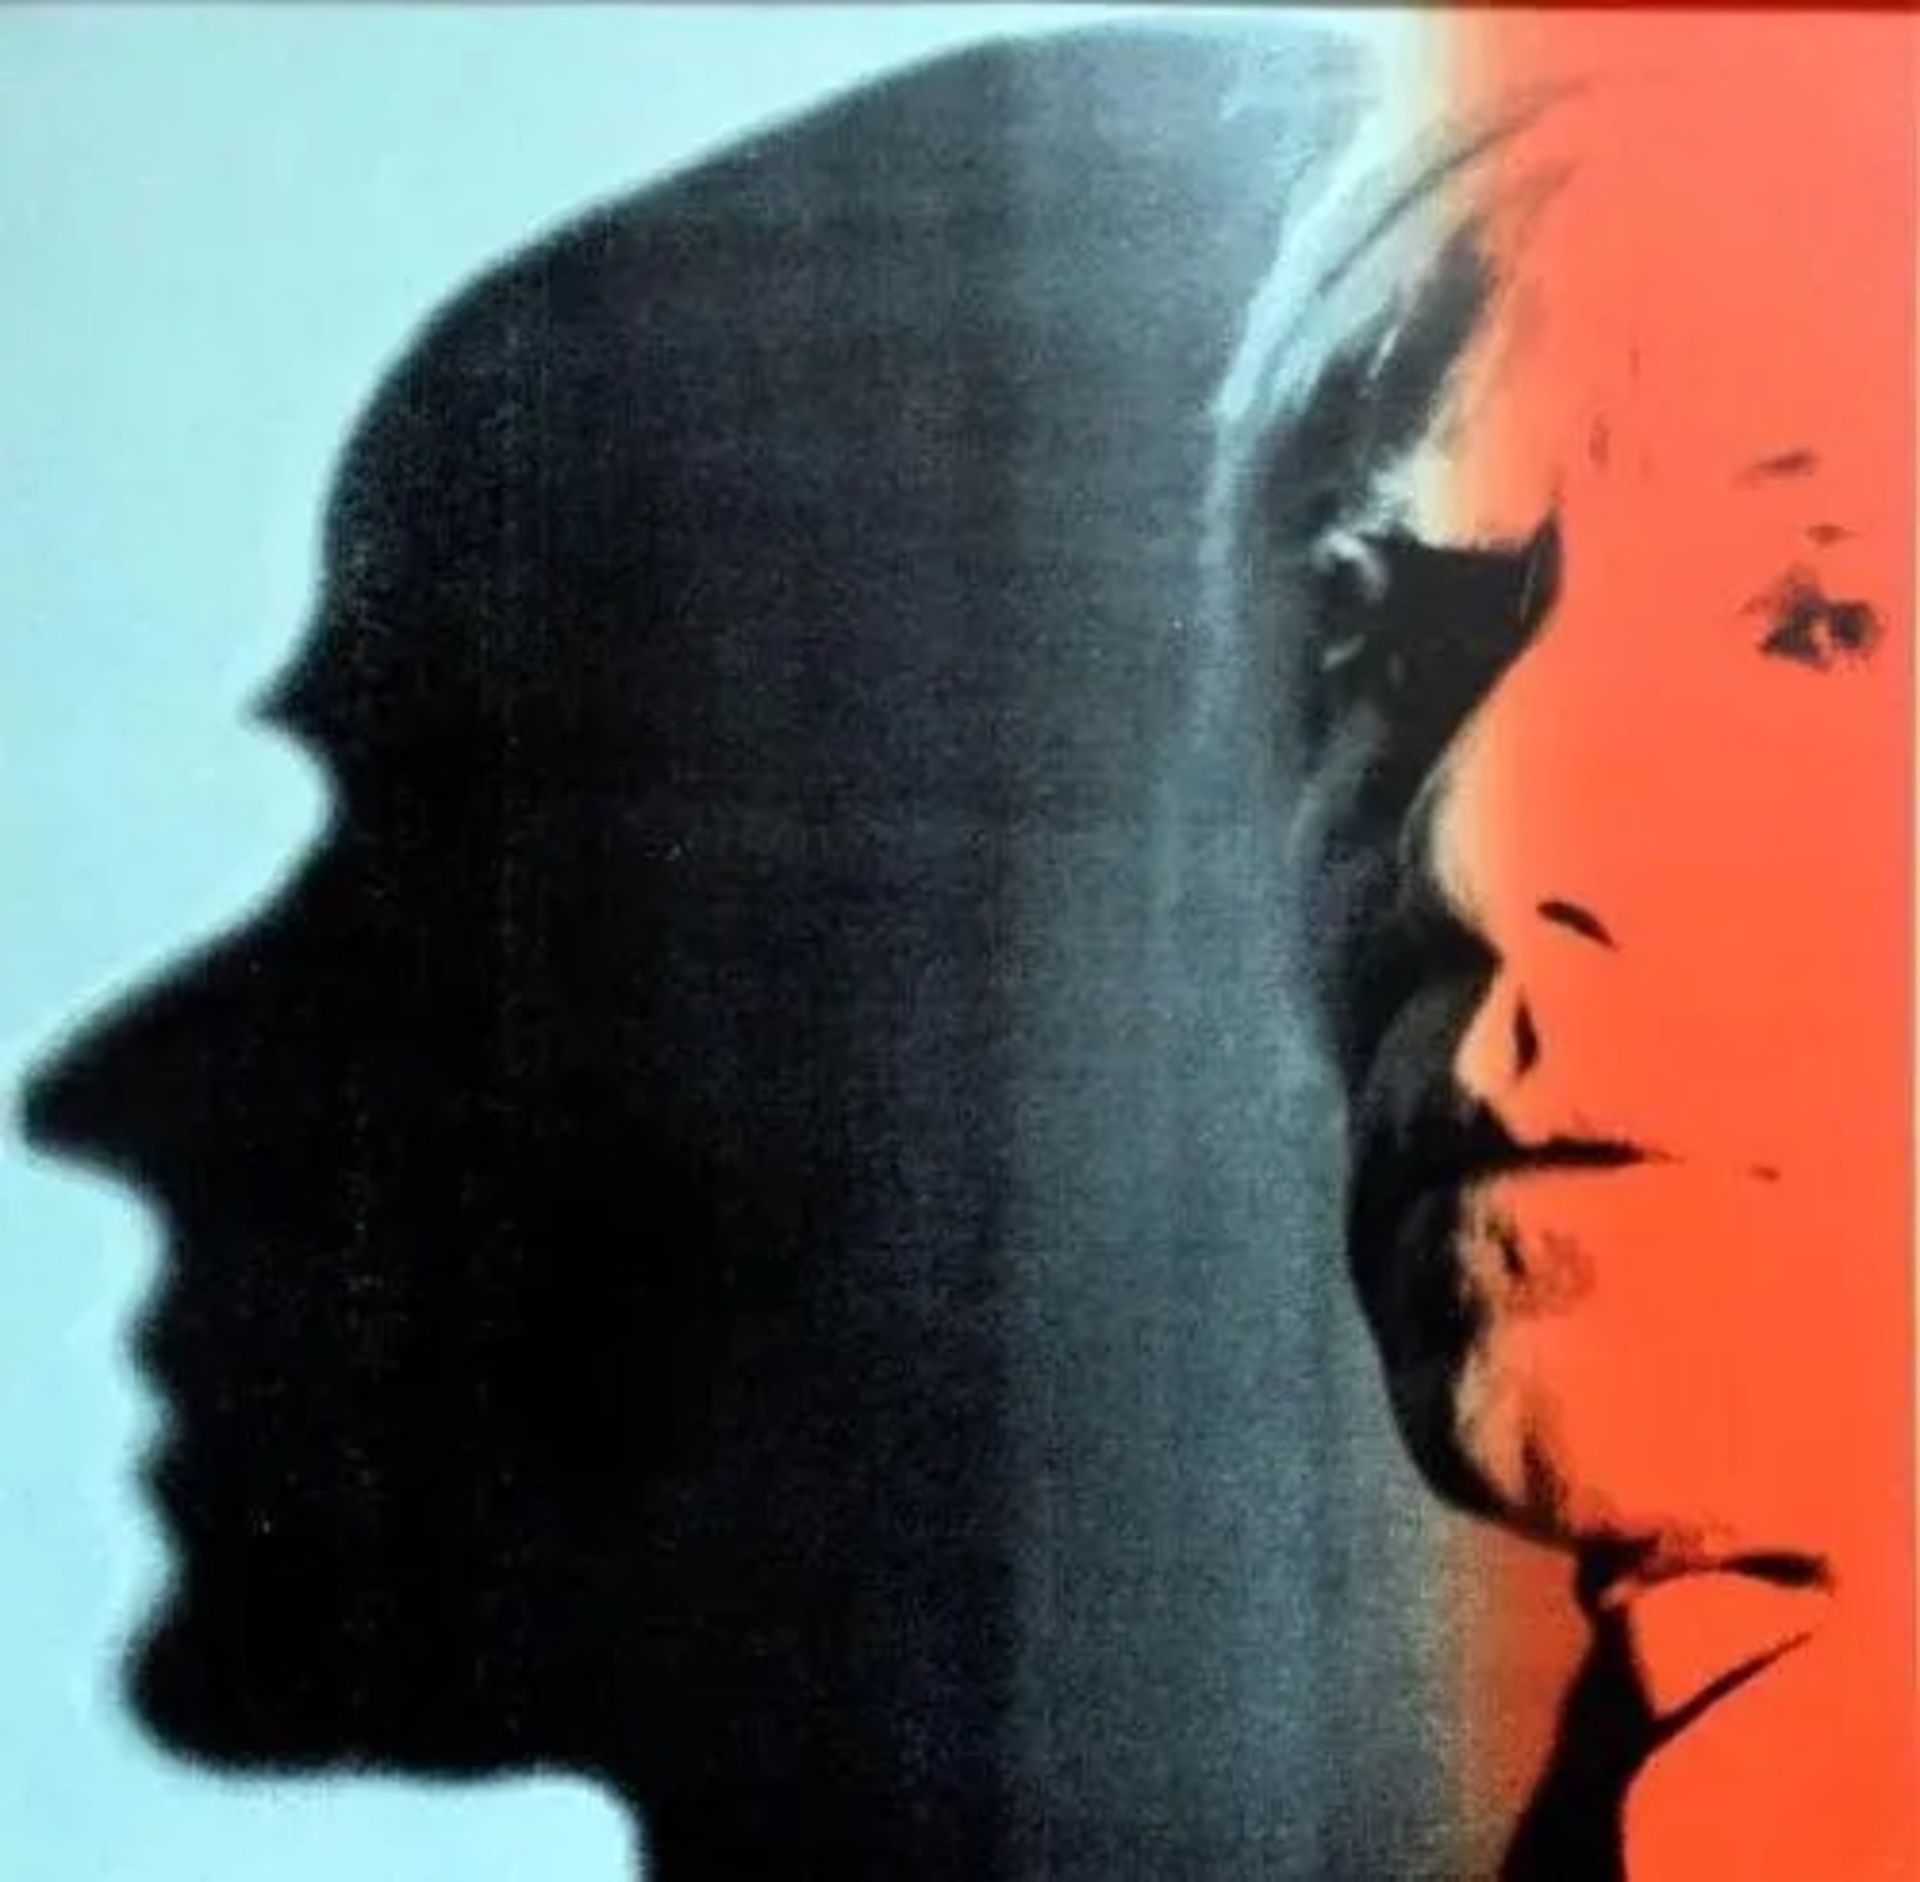 Andy Warhol "The Shadow" from "Myths", 1981 Screenprint